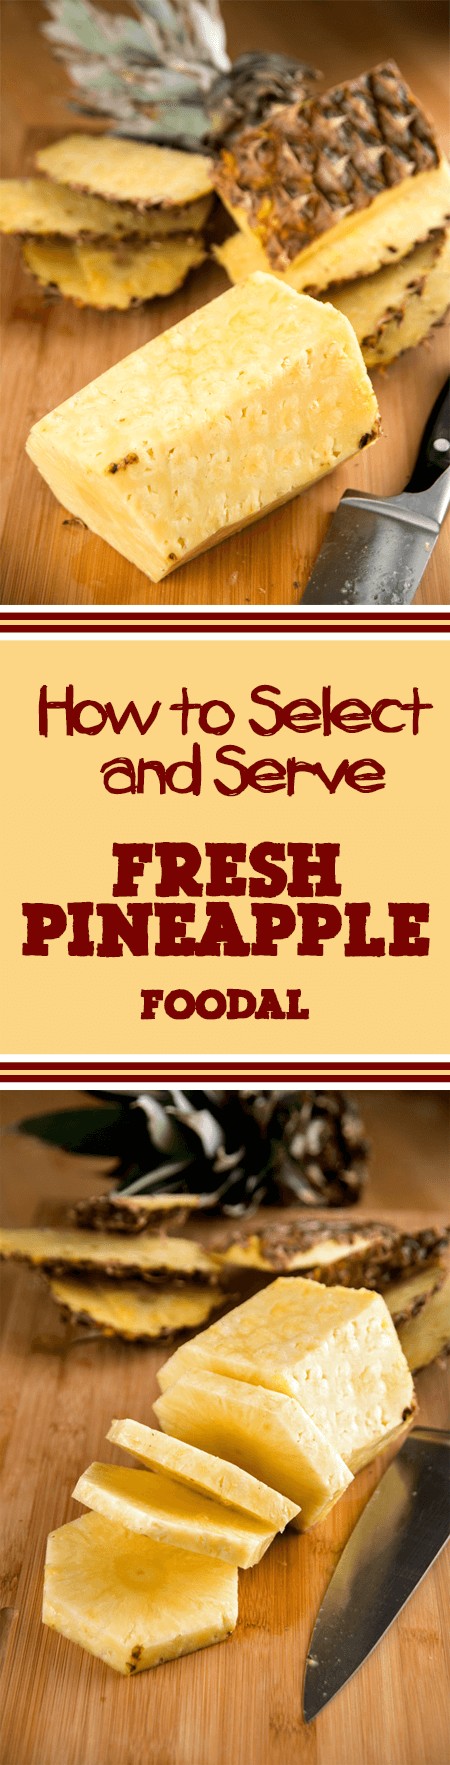 Have you ever gotten an underripe pineapple that was hard as your granite countertops? Having problems getting that sucker peeled and sliced just so? If so, give Foodal's detailed guide a read and you'll have all of your pineapple problems solved. Get the guide here: https://foodal.com/knowledge/how-to/select-serve-fresh-pineapple/